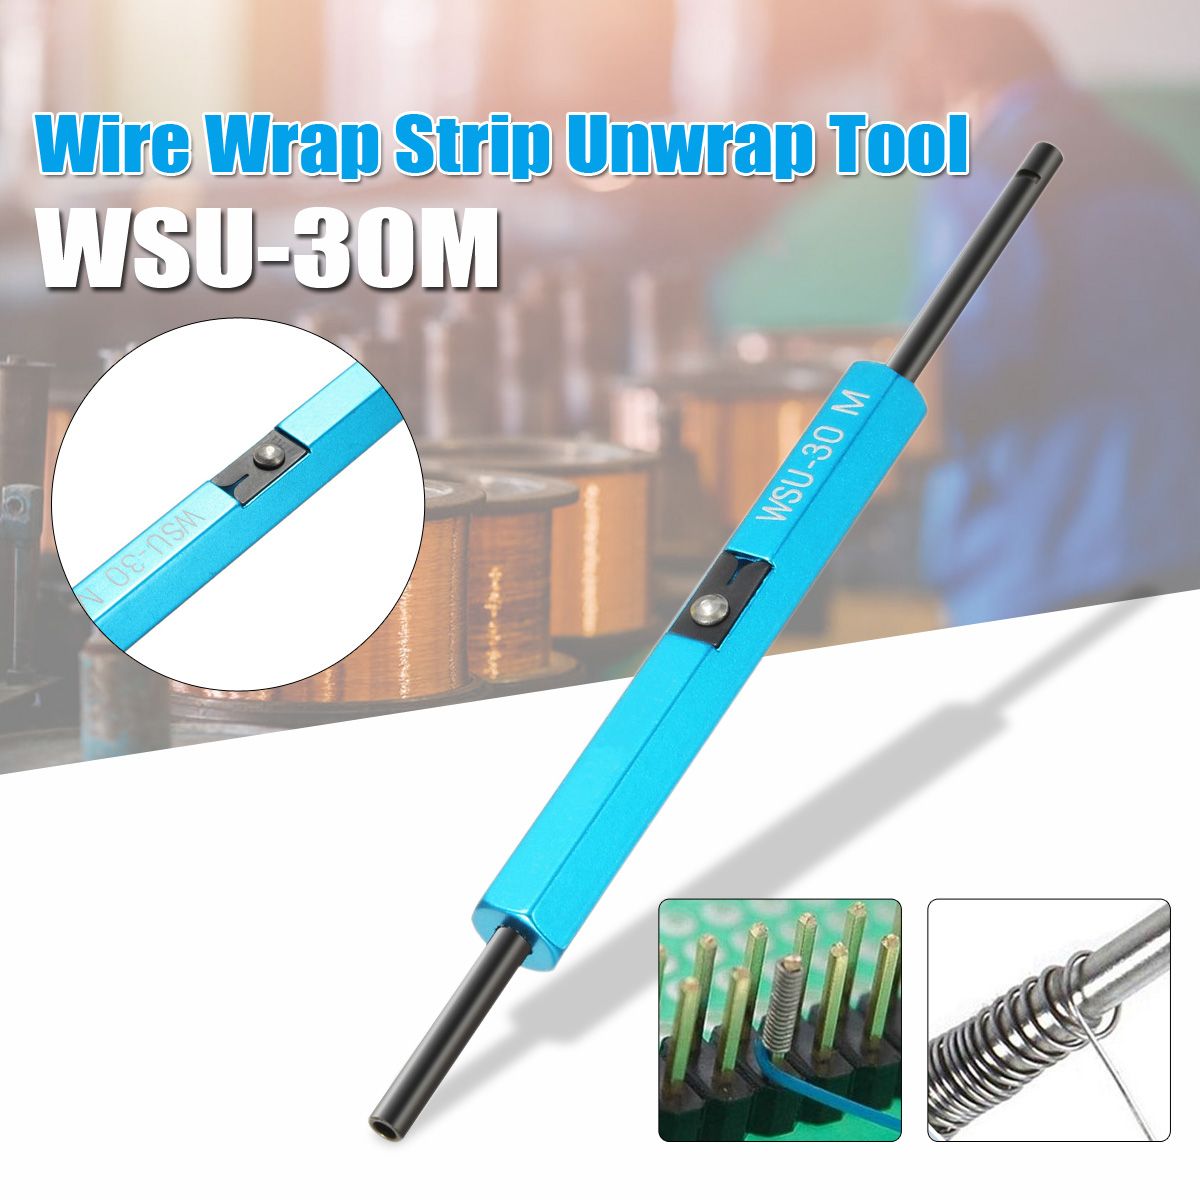 New Durable Wire Wrap Hand Tools Wsu-30m Wire Wrap Strip Unwrap Tool For  Awg 30 Cable Prototyping W